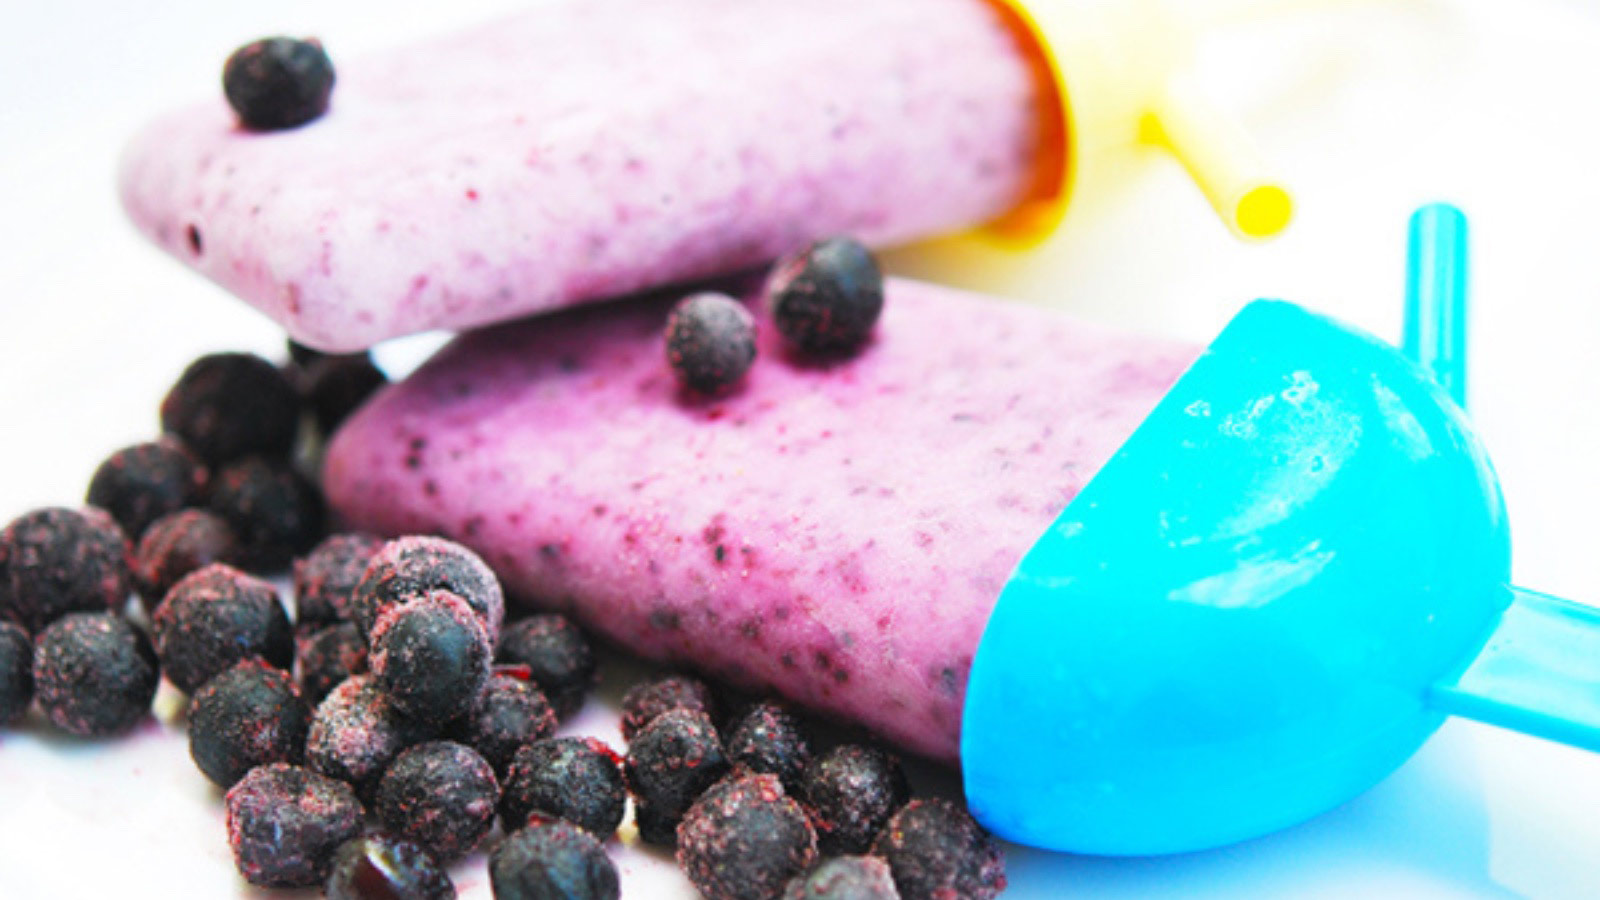 Two Blueberry Yogurt Popsicles laying on a white background with frozen blueberries in front of them.